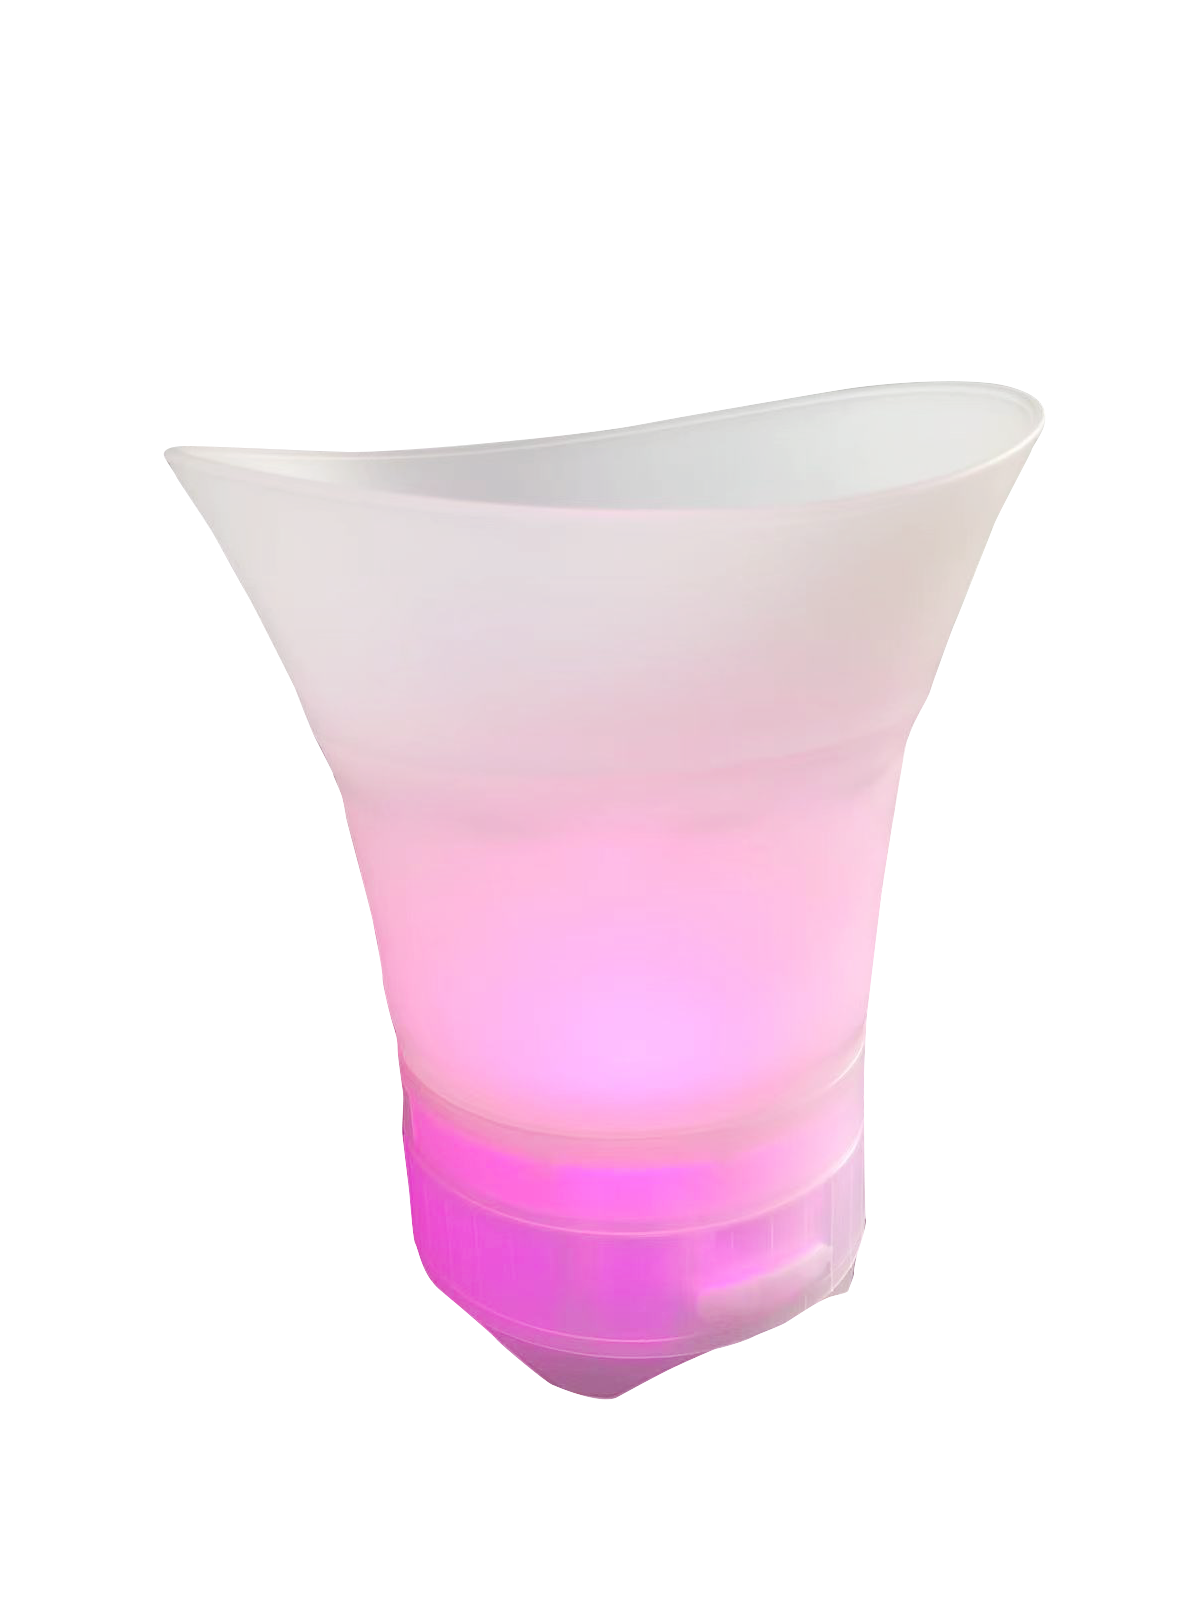 Portable Collapsible Ice bucket -Cooler for Wine, soda, drinks with built In wireless speaker-Party LED lights- Lumi Chill